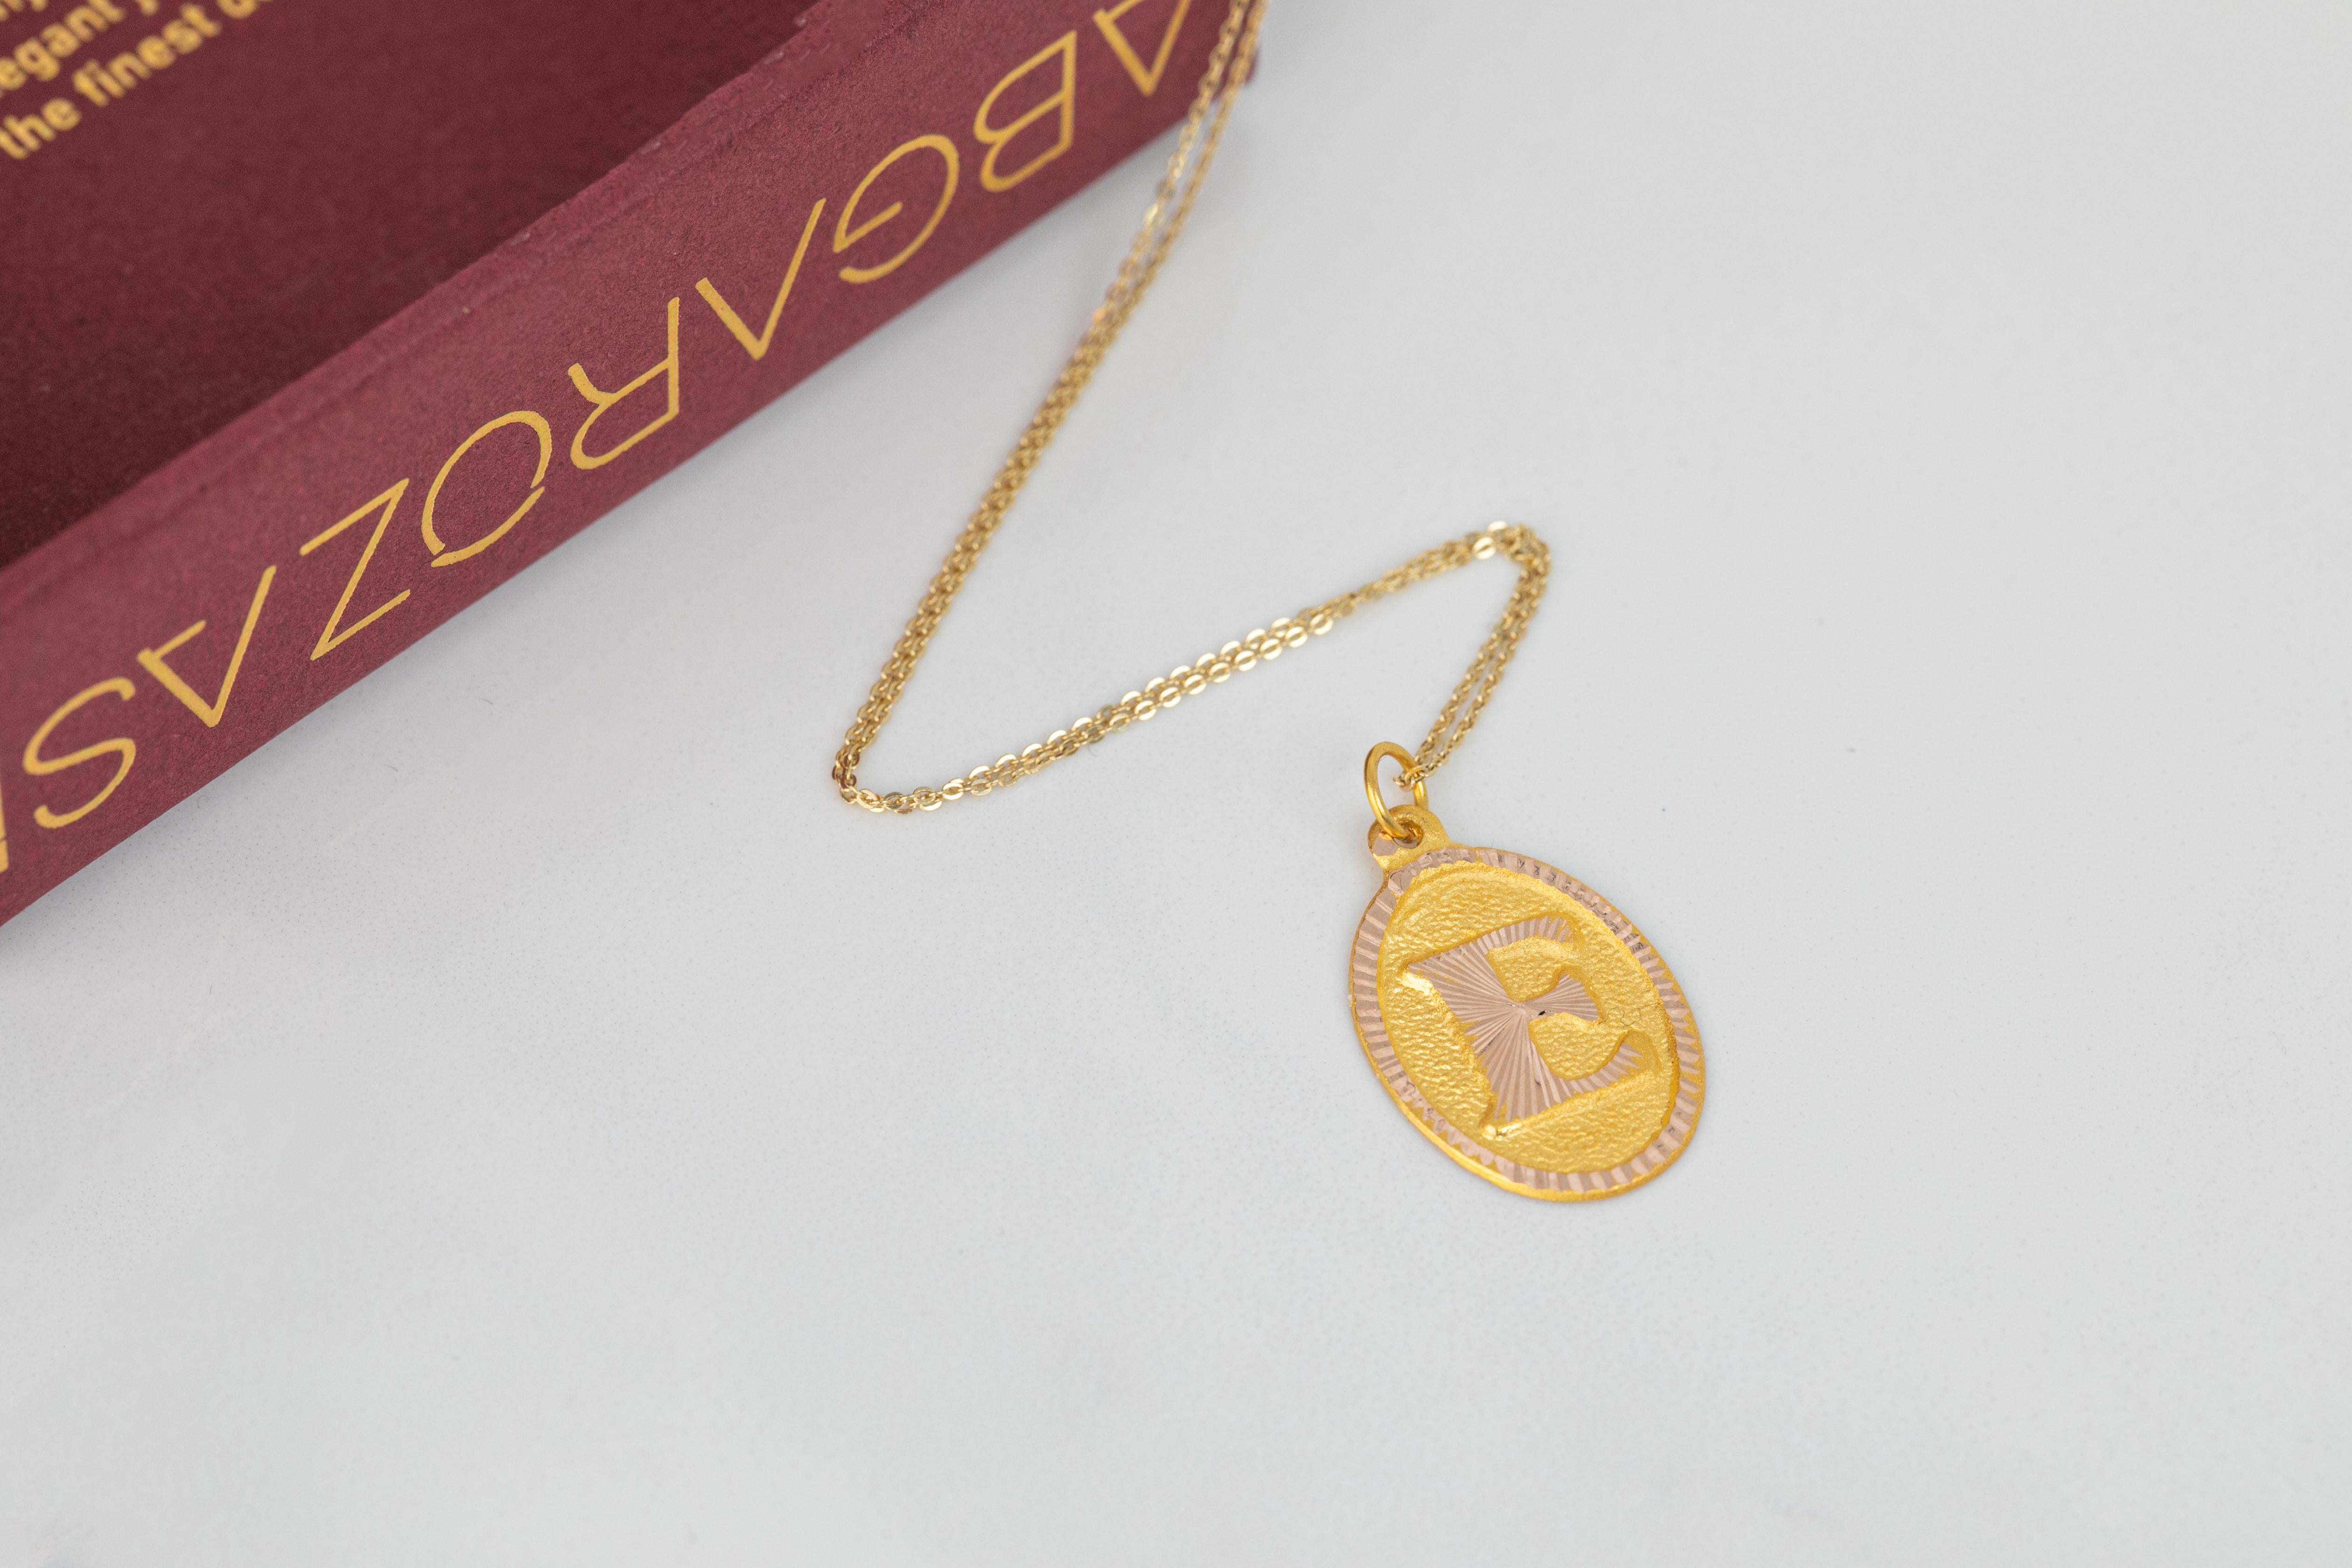 14K Gold Necklaces, Letter Necklace Models, Letter E Gold Necklace-Gift Necklace Models, Daily Necklaces, Letter Jewelry

It's a manual labor product. 'Handmade'. Fashionable product.

This necklace was made with quality materials and excellent